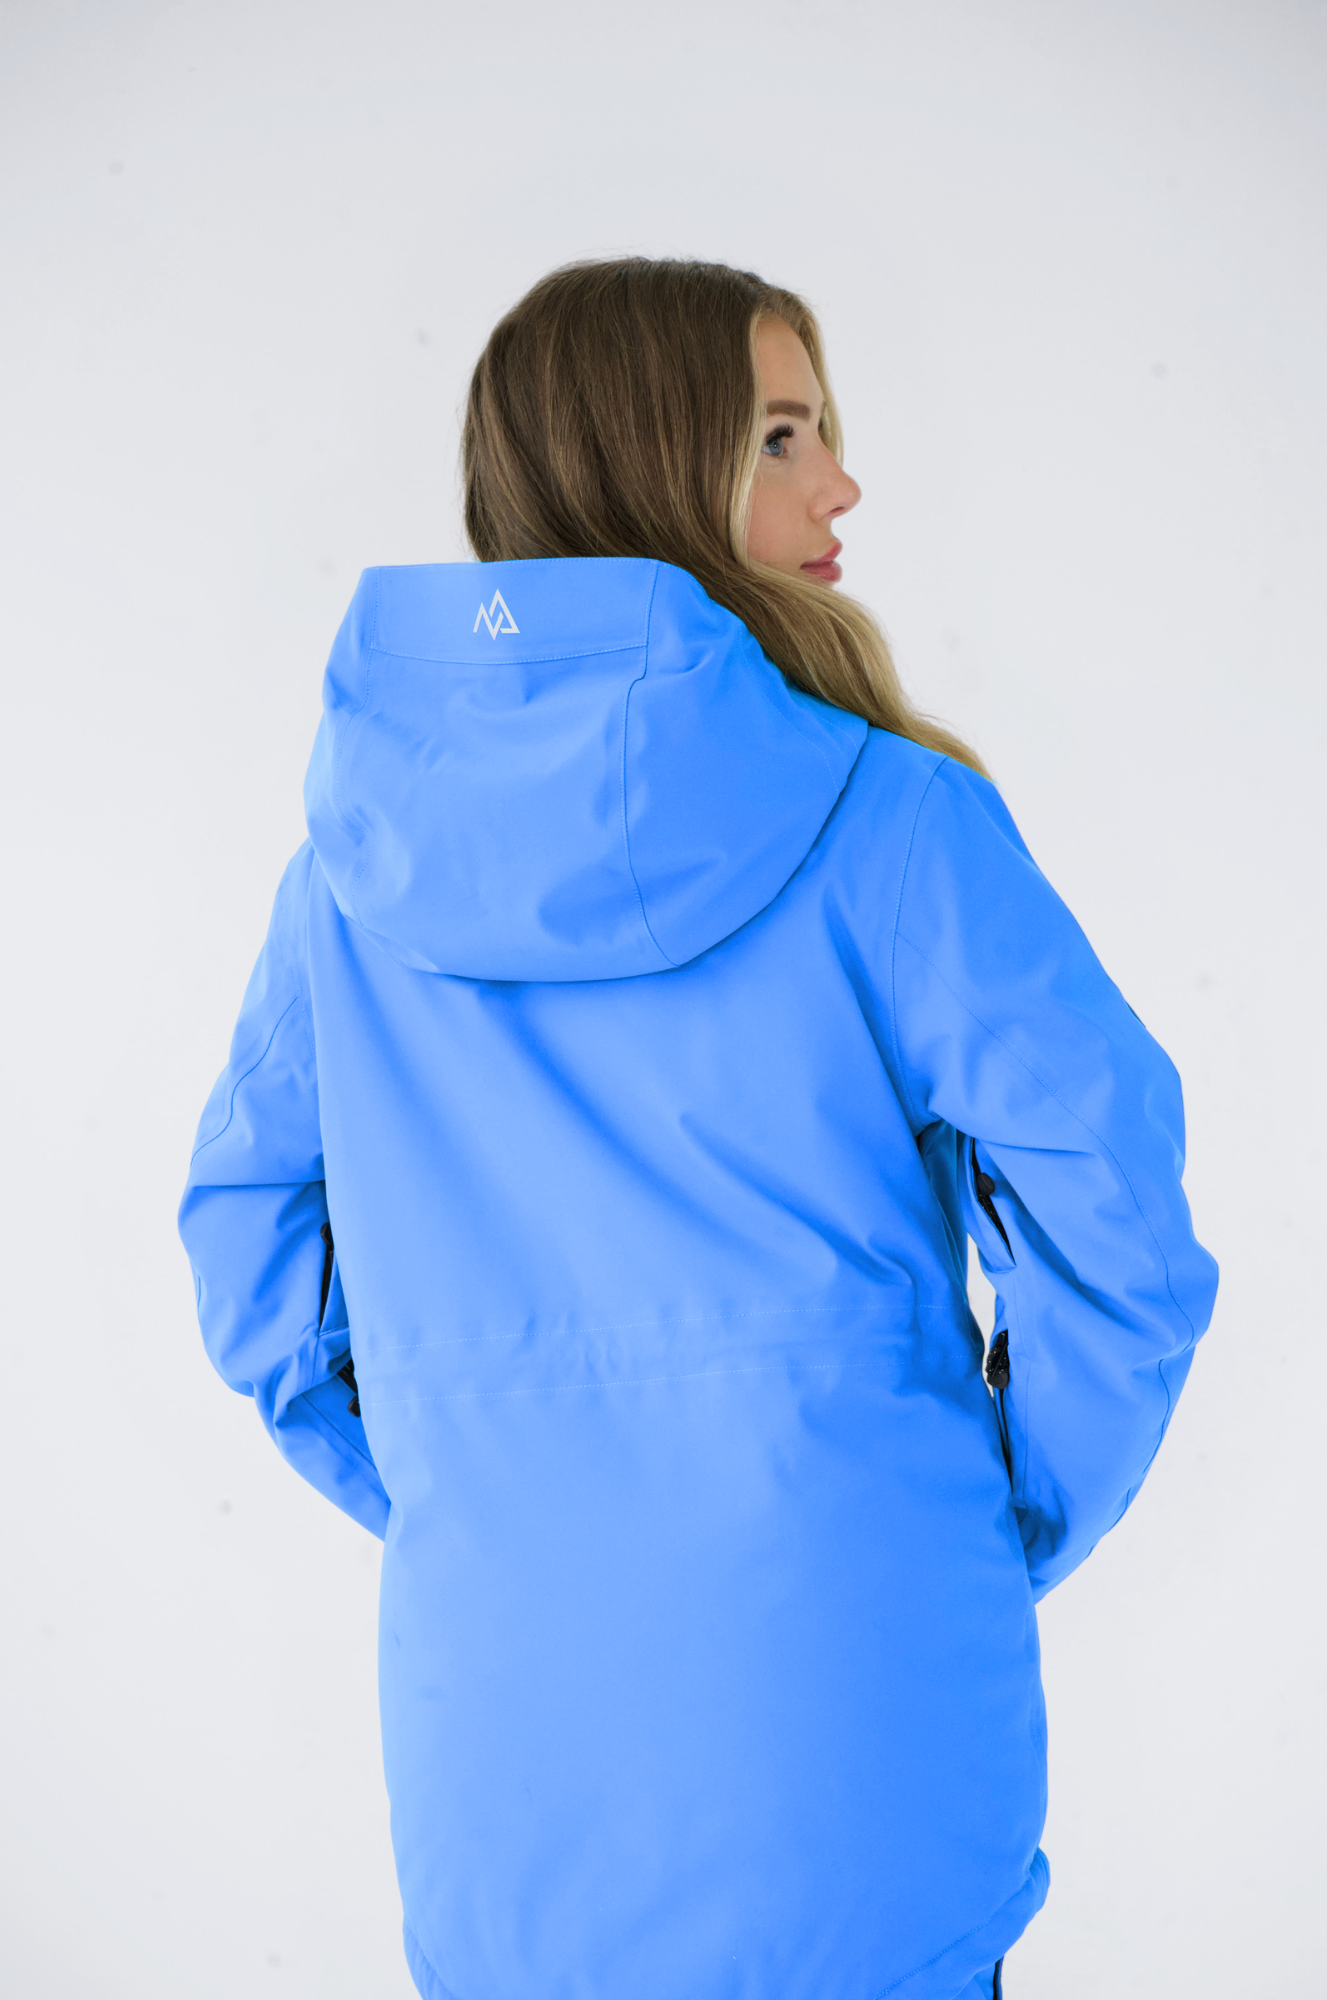 Back view of a woman in a vibrant blue Nexarina snowboard jacket, focusing on the detailed seams and hood